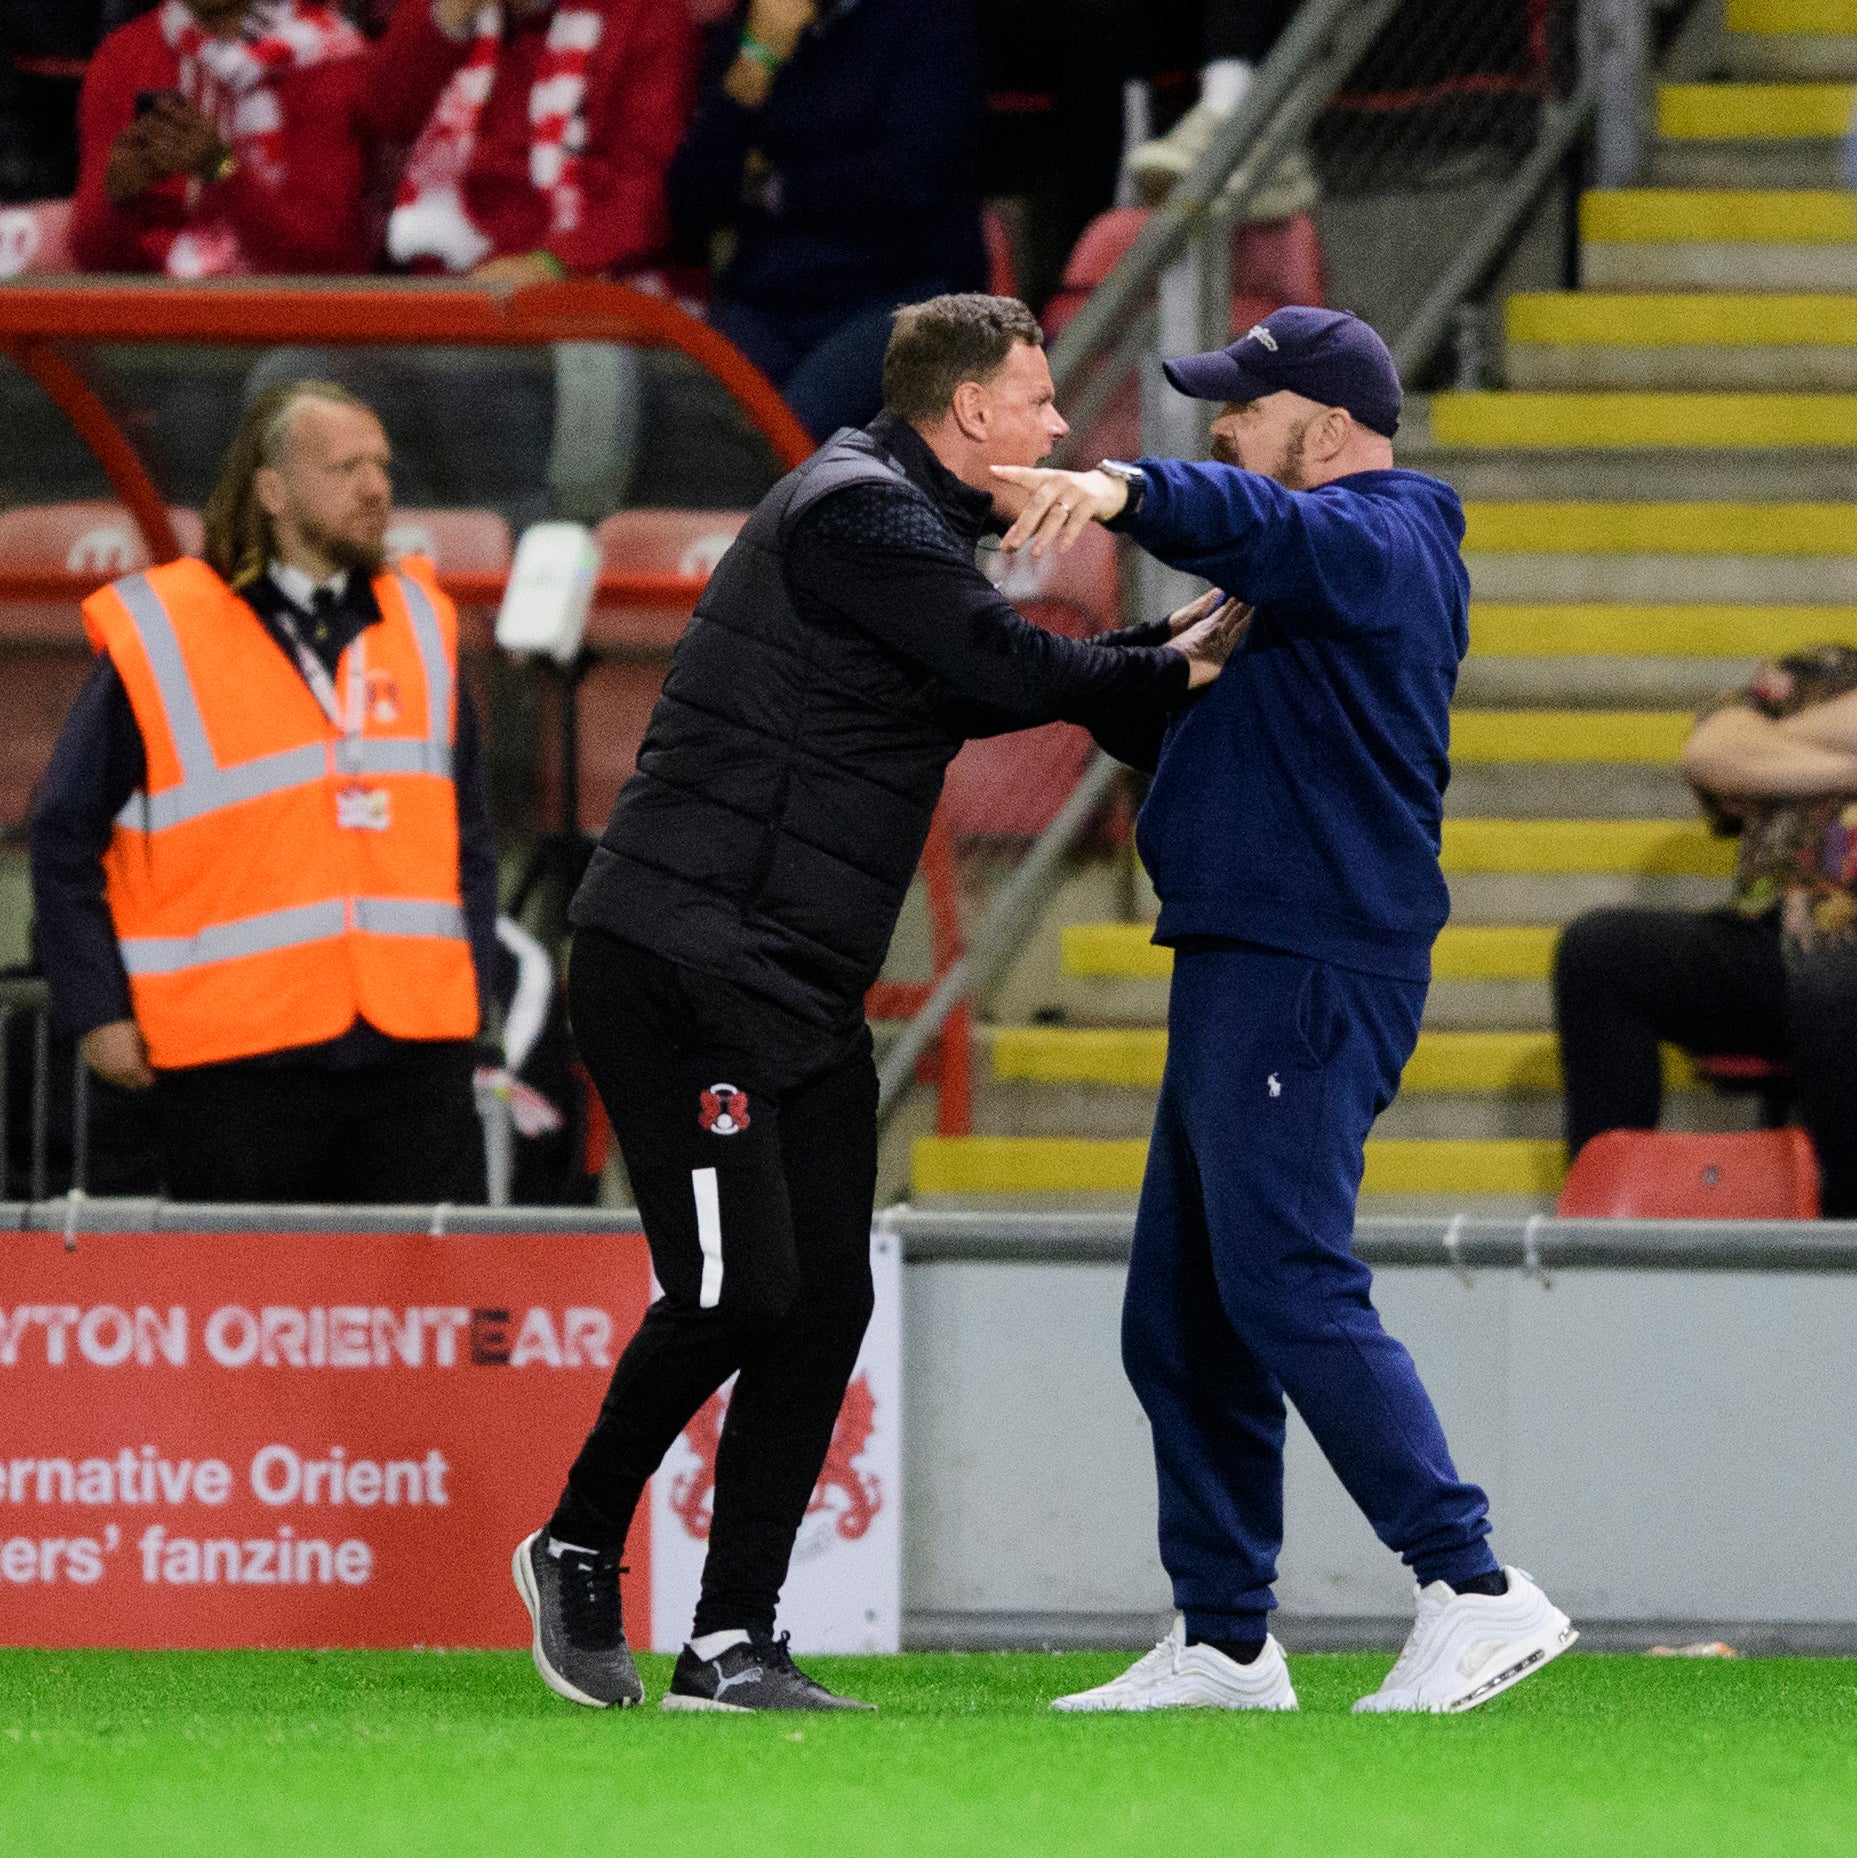 Leyton Orient’s manager Richie Wellens clashes with a fan